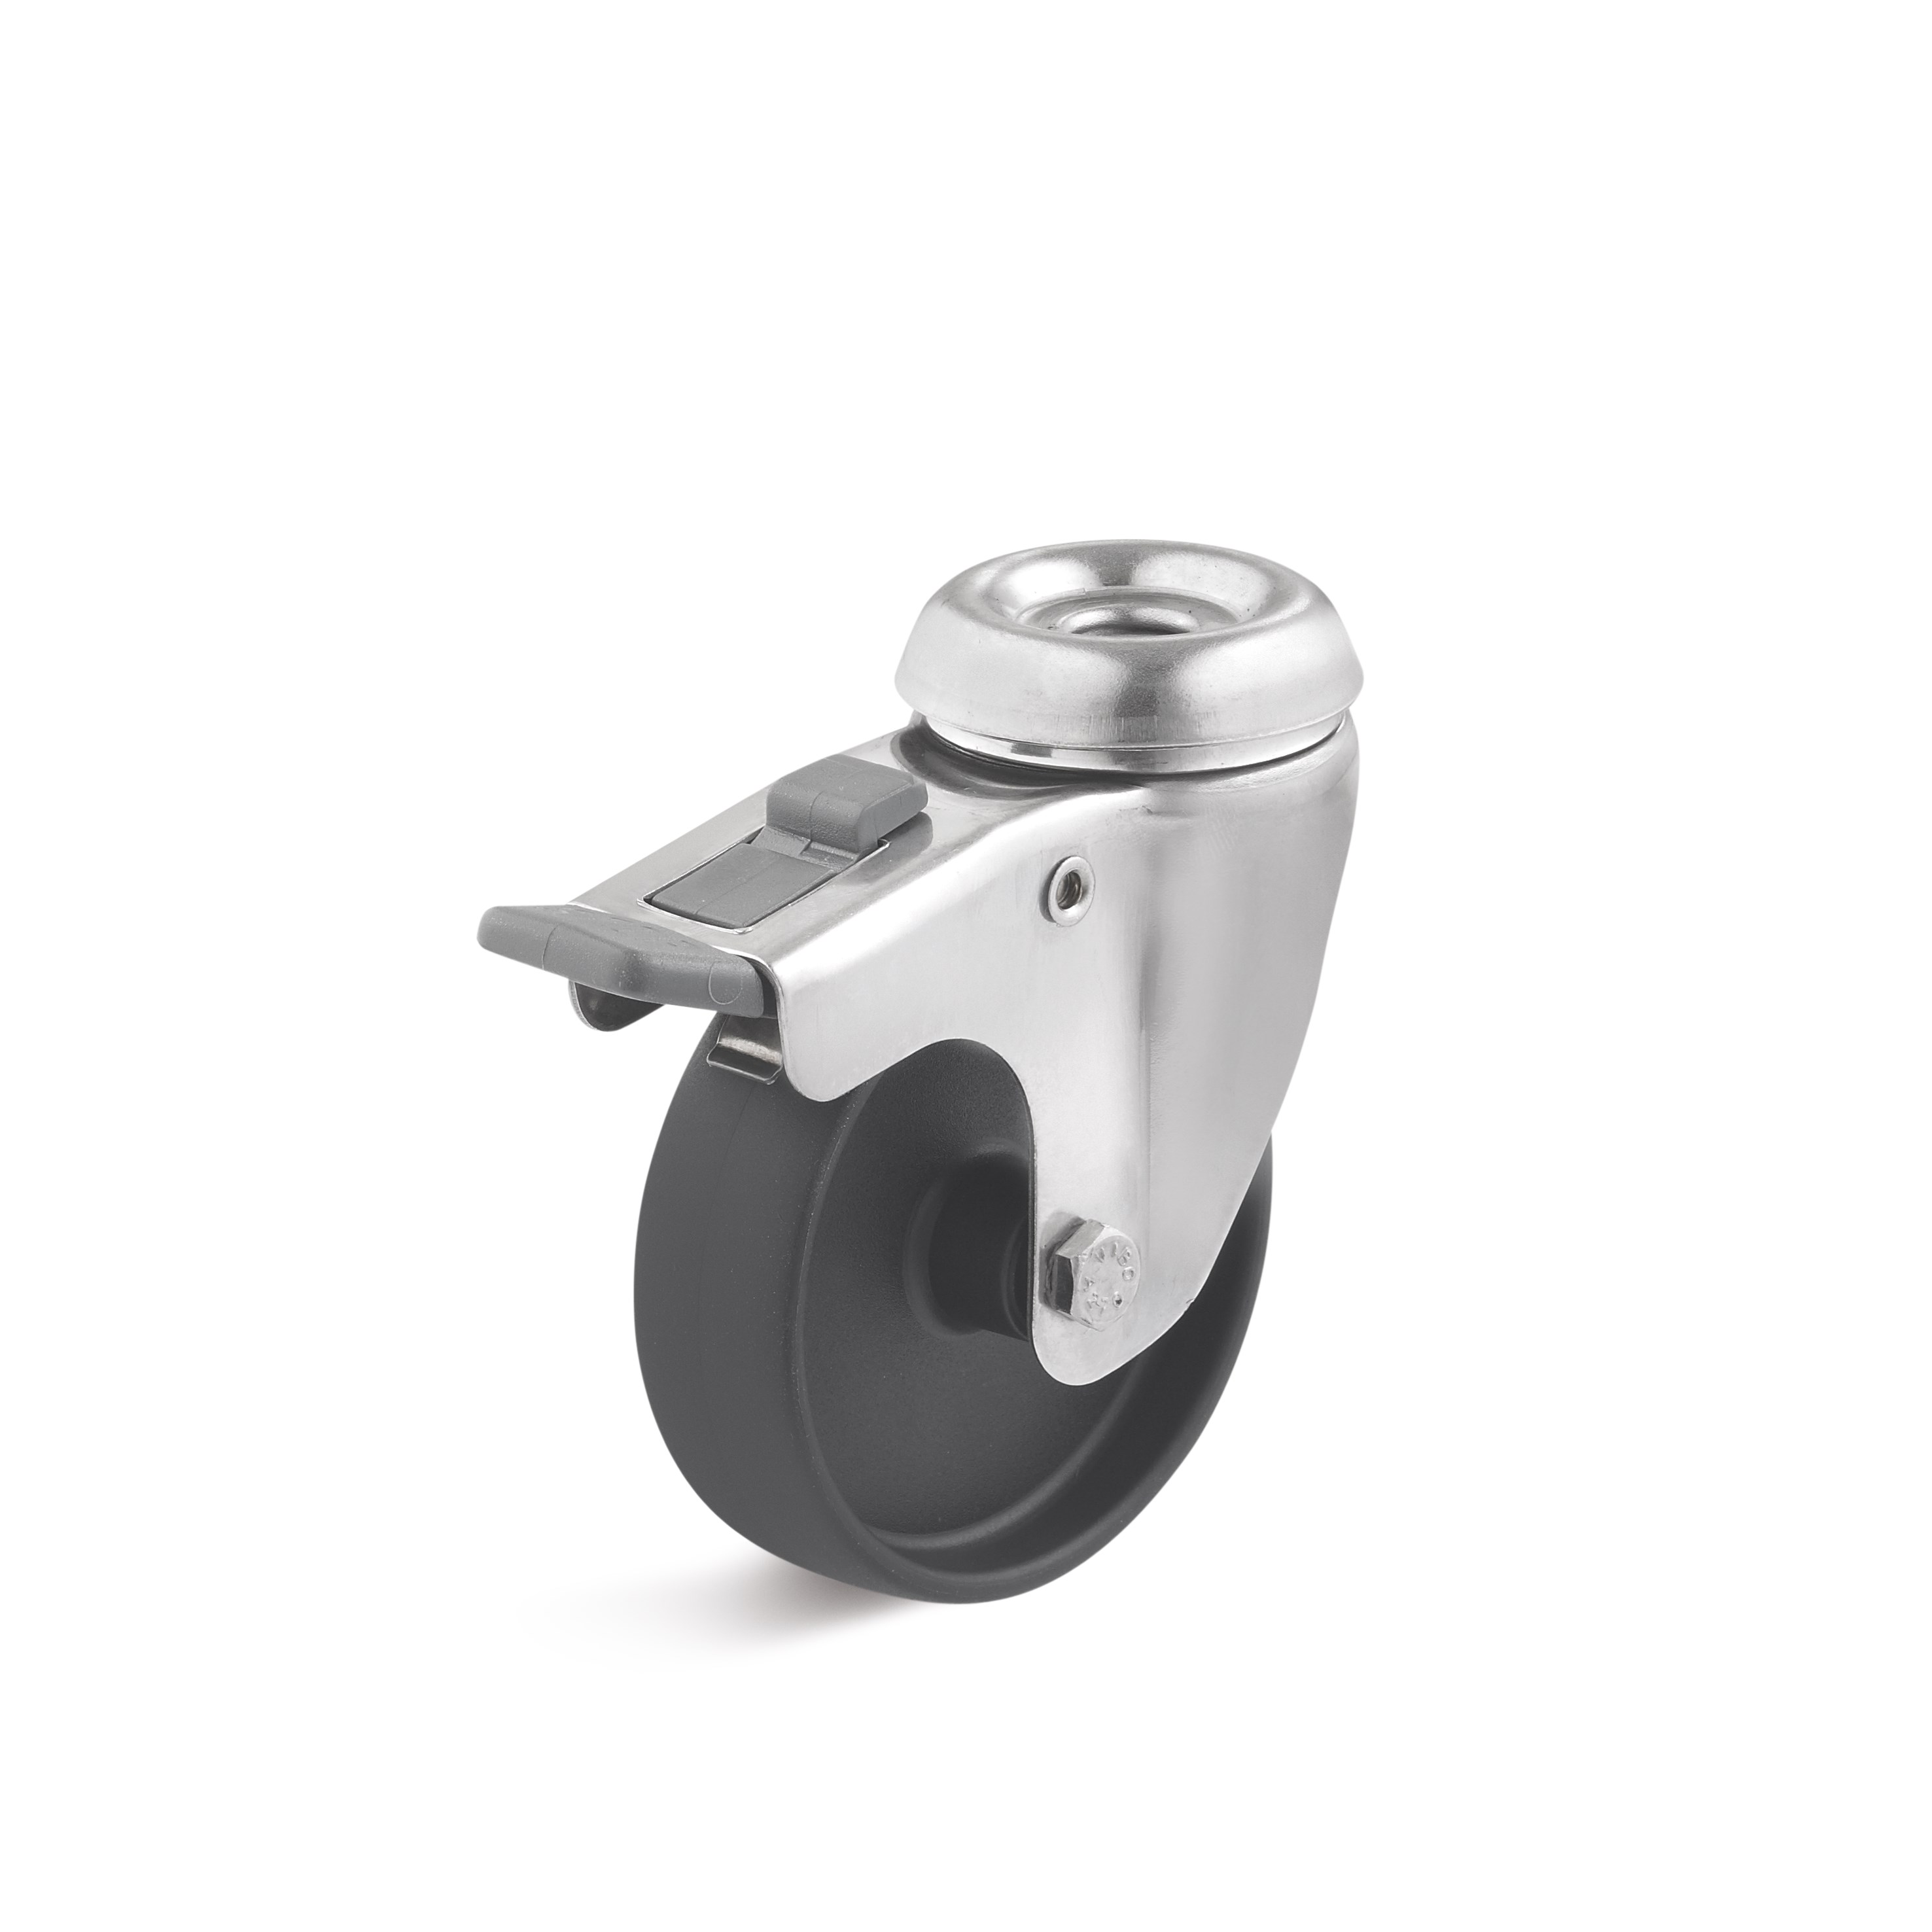 Stainless steel swivel castor with double stop, rear hole attachment, polyamide wheel L-AV-PAA-050-G-1-DSN